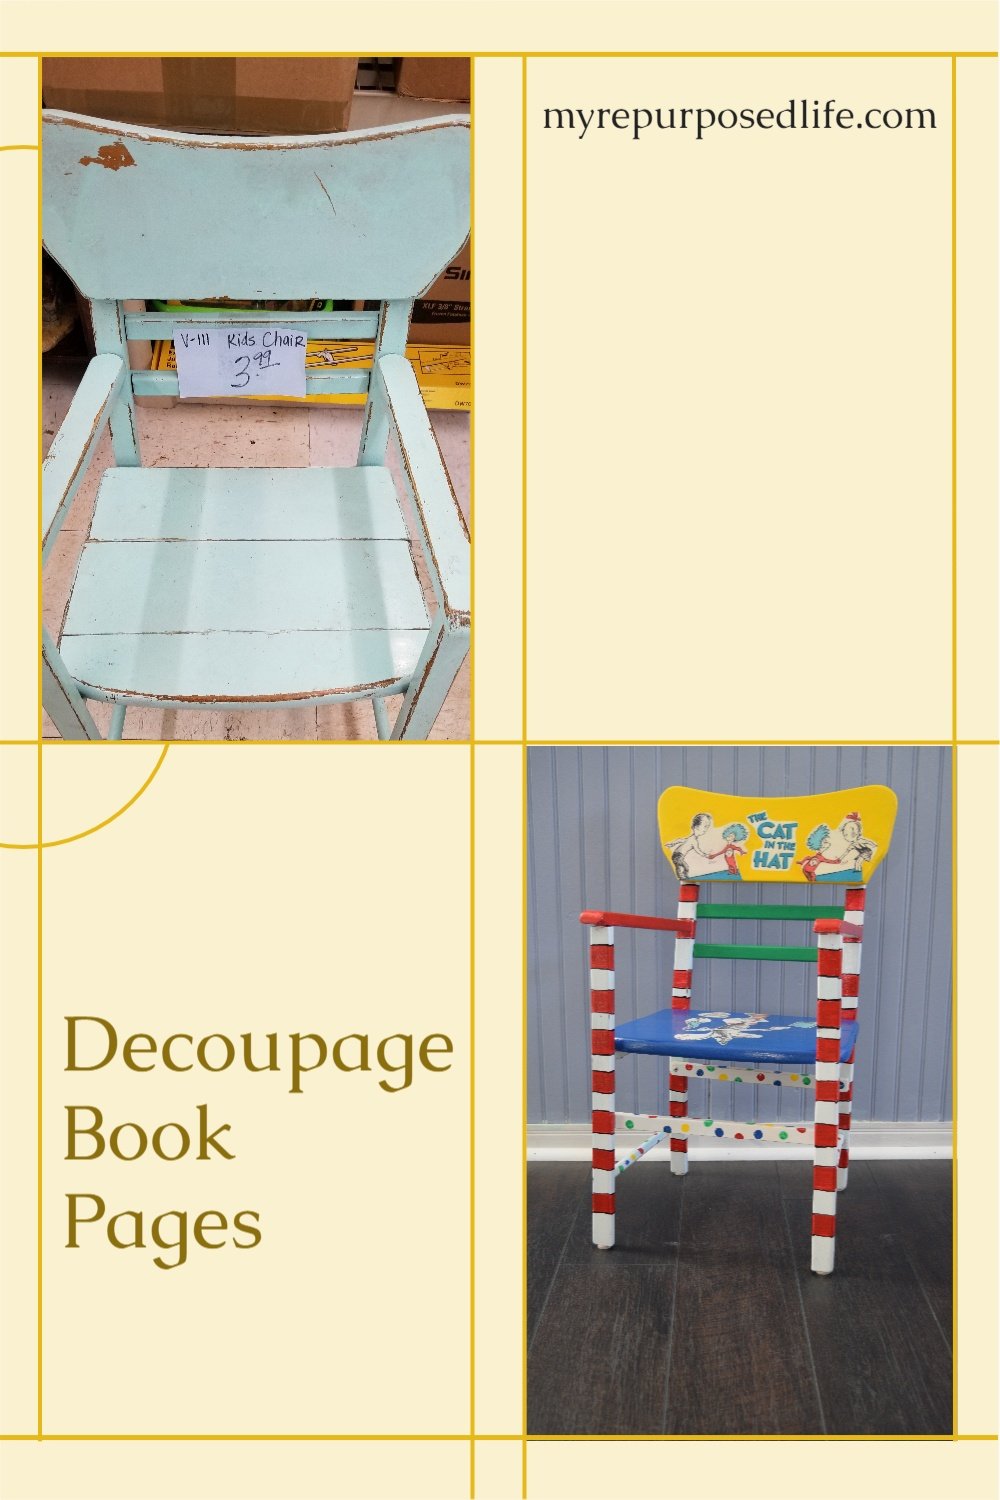 How to make a Dr. Seuss chair for your little one. This vintage chair was perfect to decoupage book pages. Tips for Mod Podge gone wrong. #MyRepurposedLife #upcycle #kids #chair #decoupage #bookpages via @repurposedlife